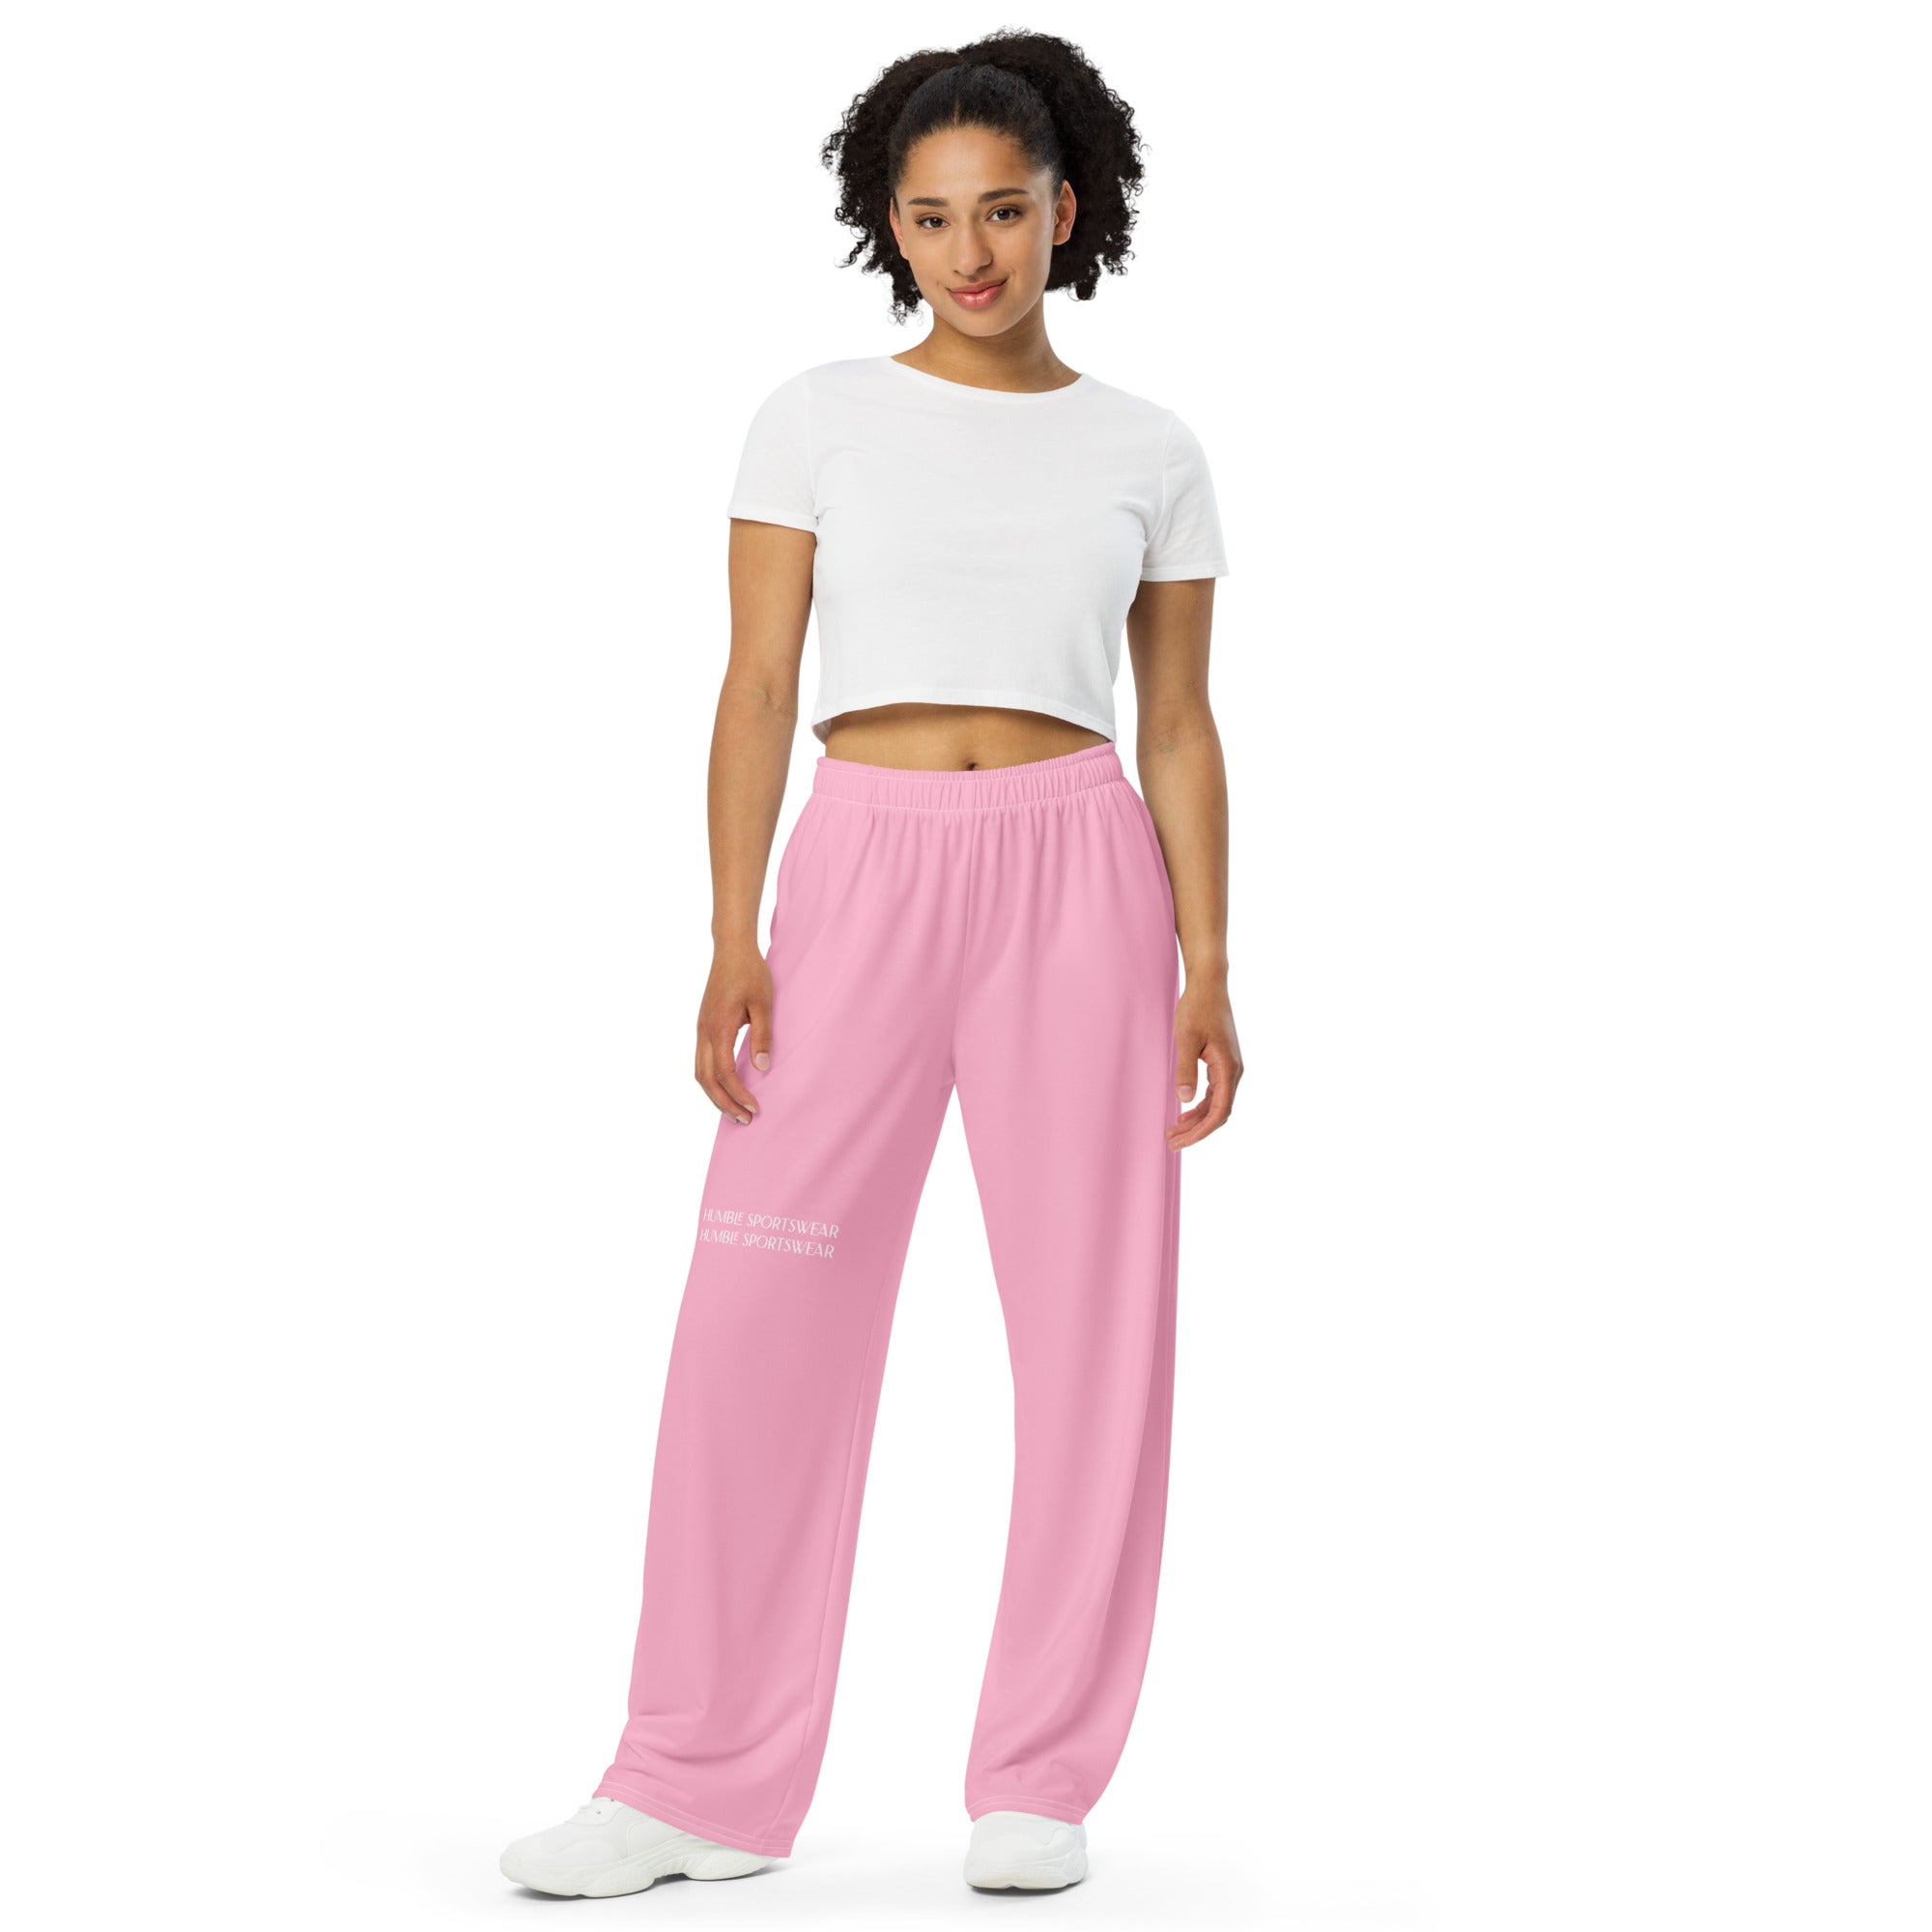 Buy Pink Parallel Pants With Lace And Embroidery Online - Shop for W